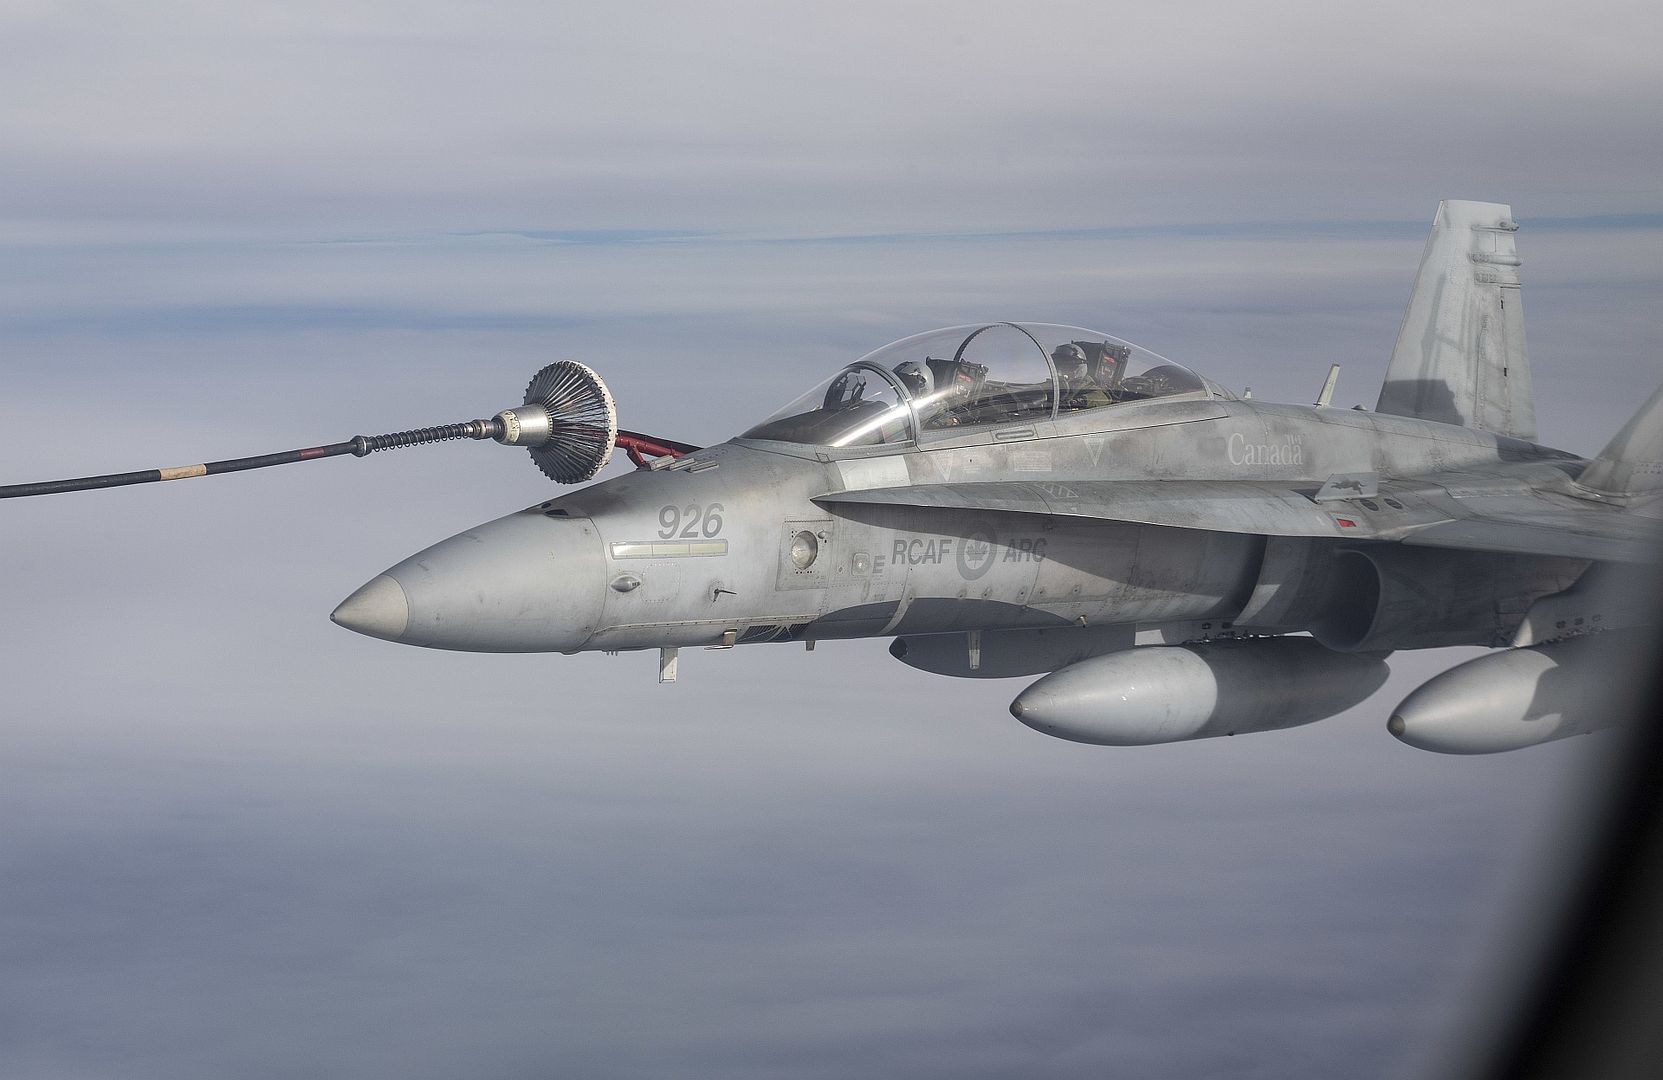 18 Hornet On Their Way To Support Operation NOBLE DEFENDER In Alaska On 12 Oct 2021